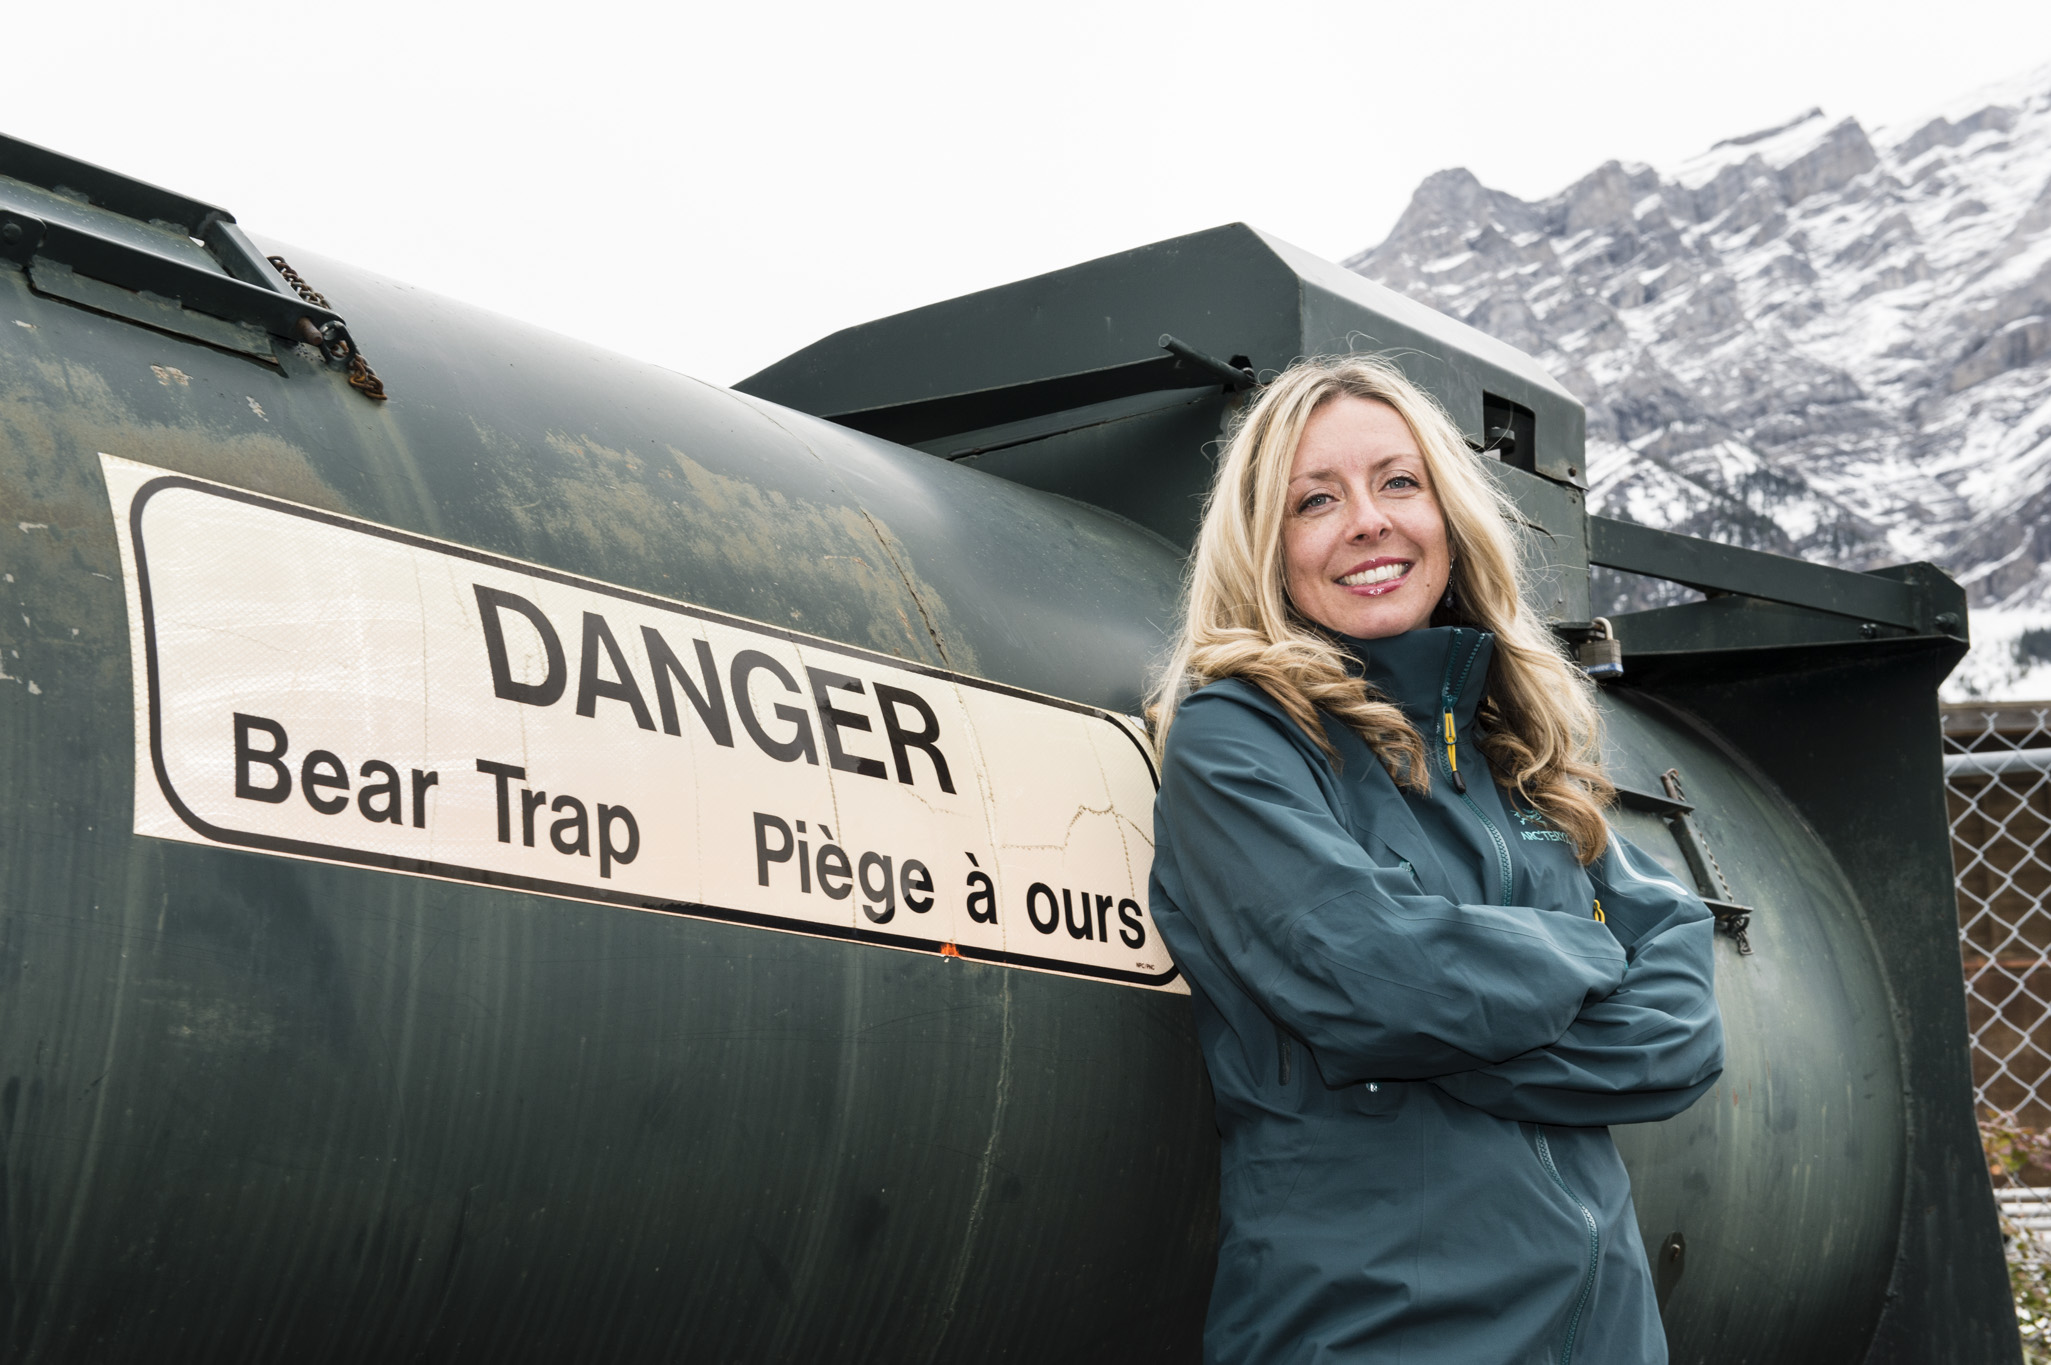 Kimberly Titchener leans against a bear trap container